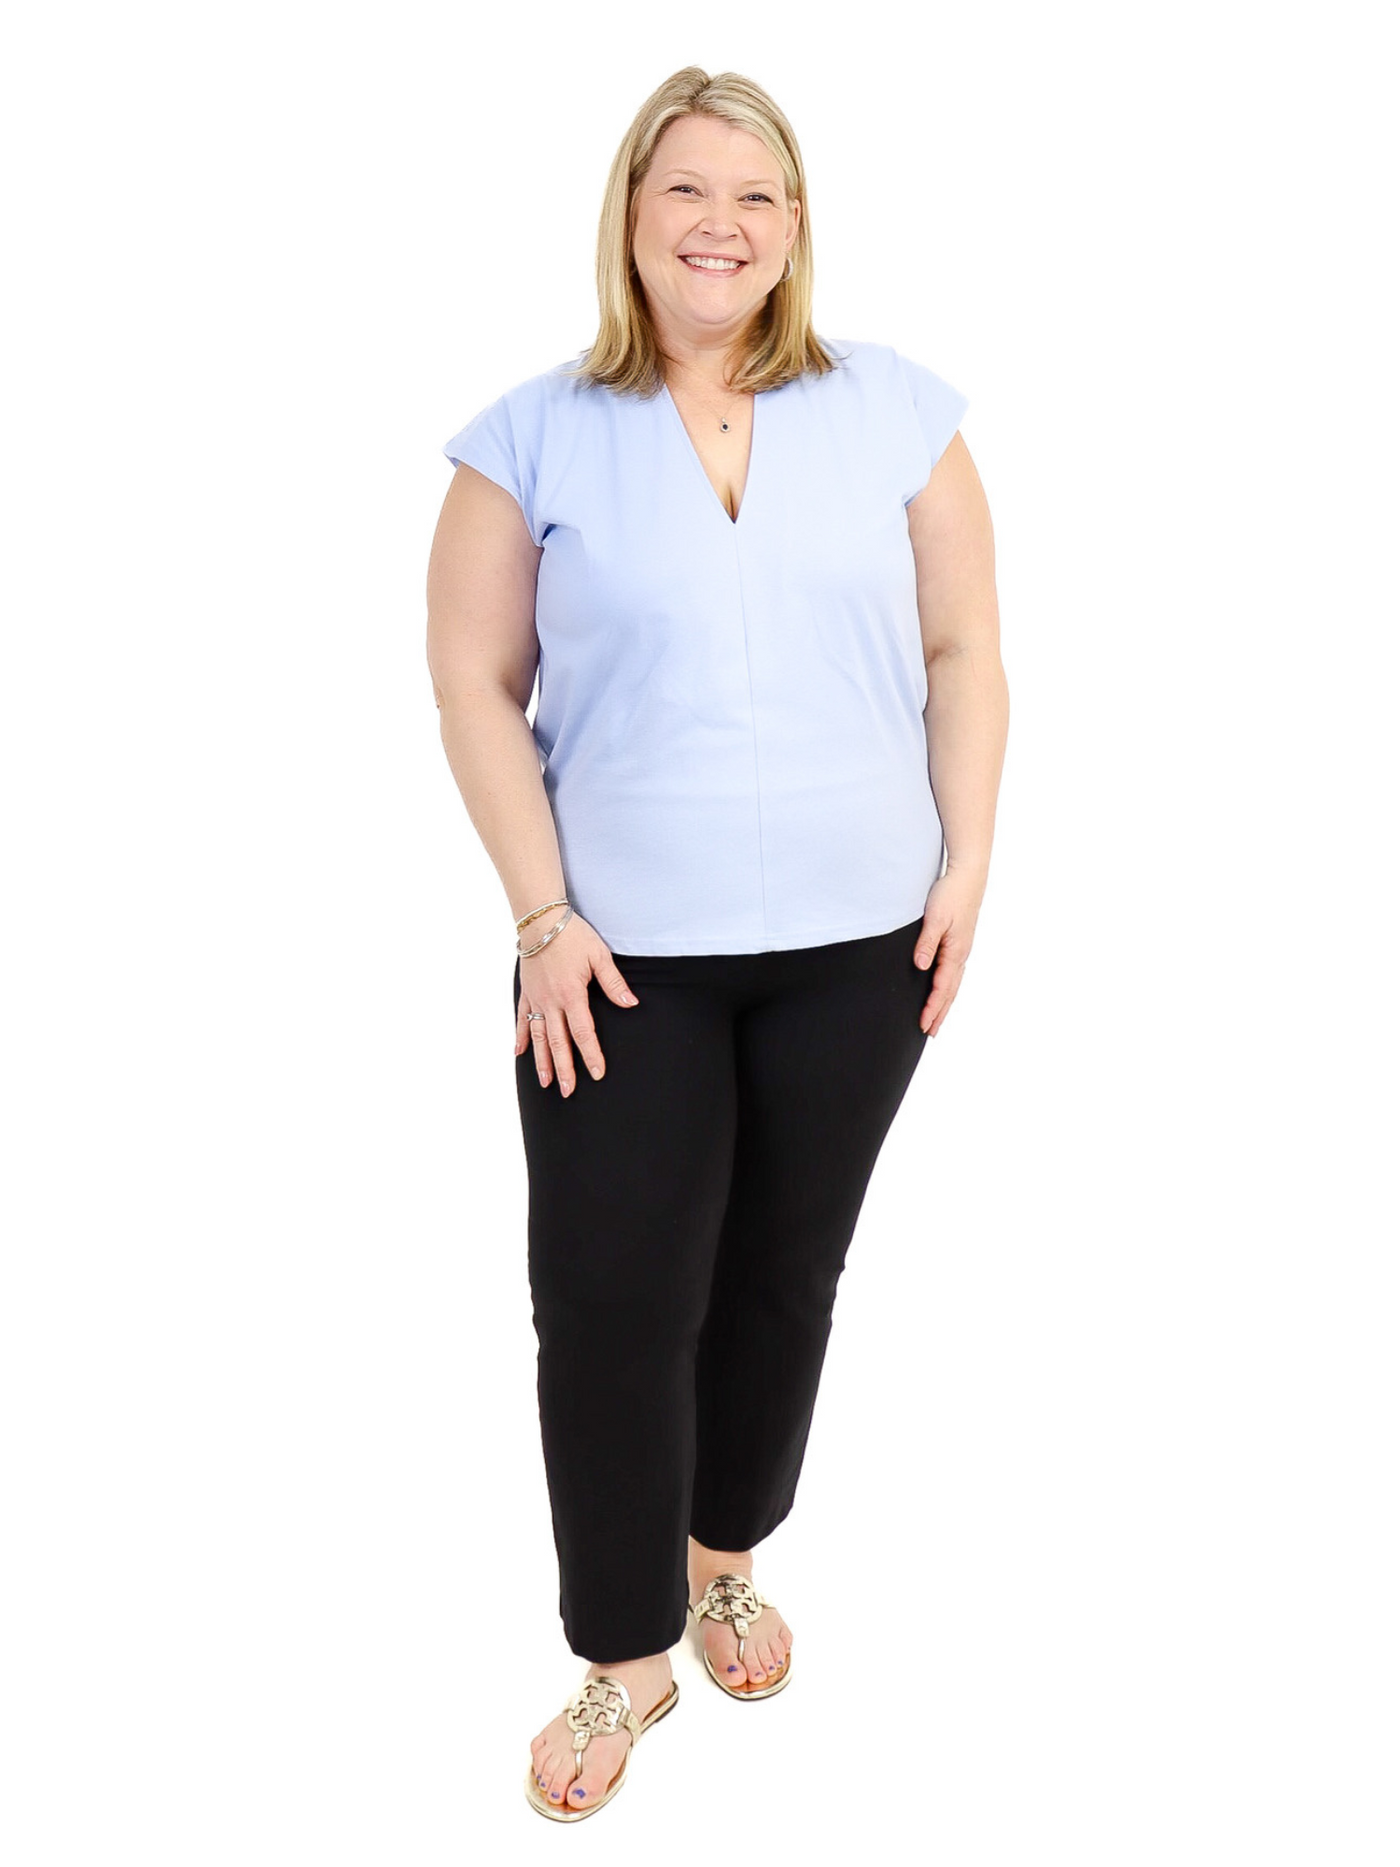 Cap Sleeve V-Neck Top Light Blue front view with Black Spanx.